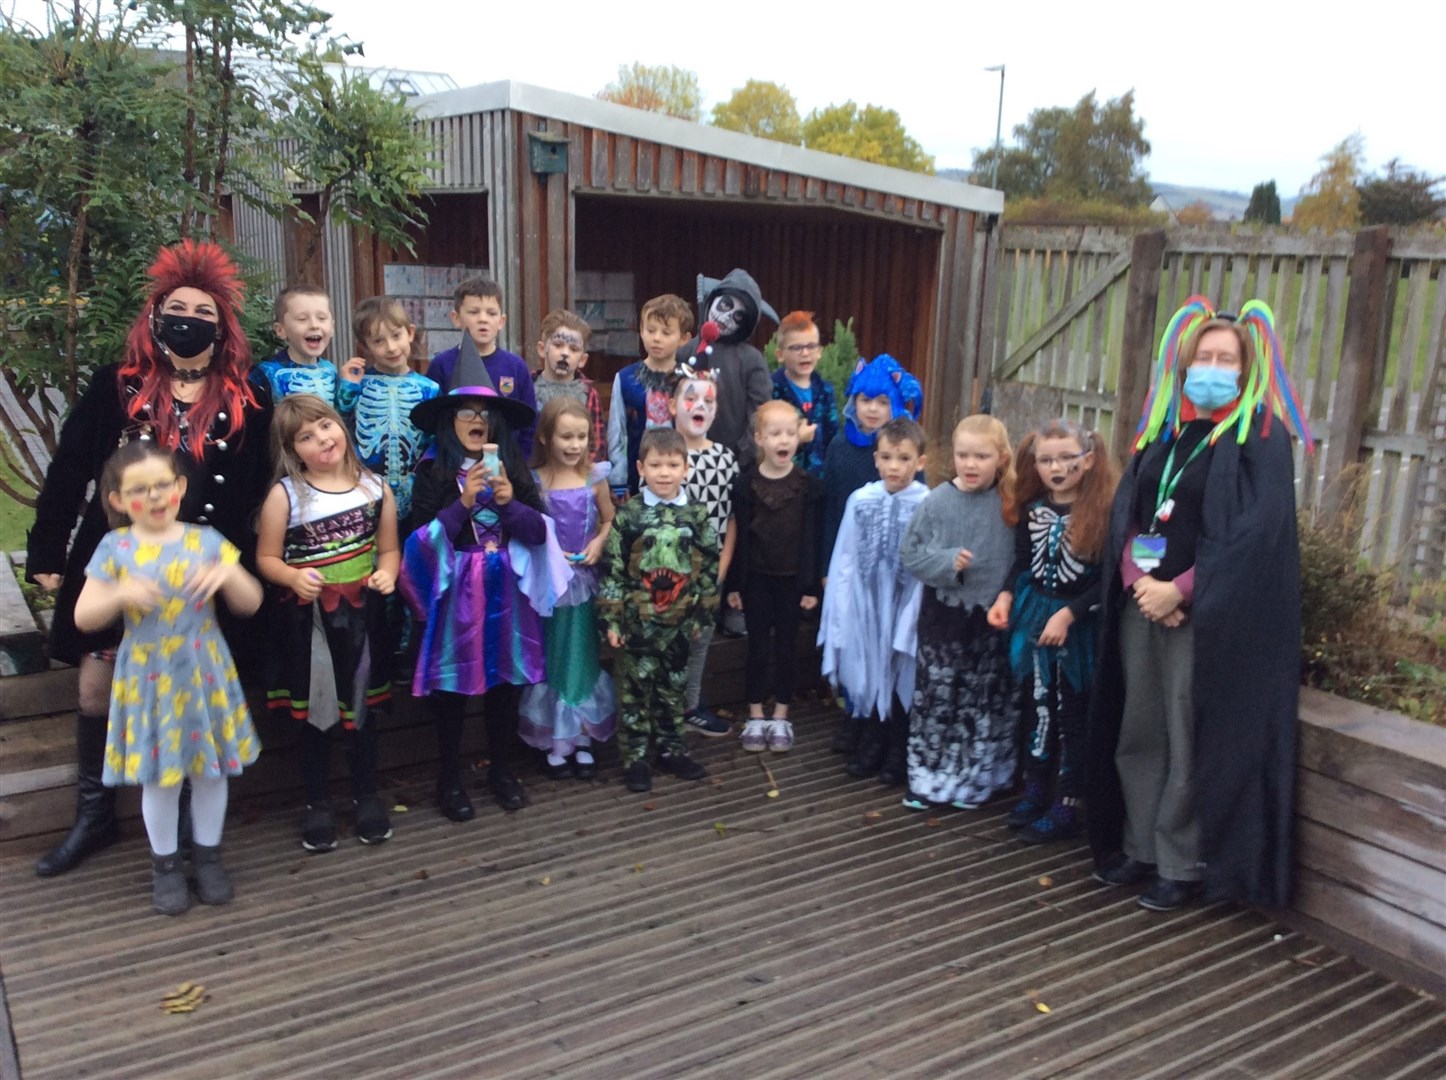 The school made the invitation and youngsters – and staff – took up the challenge.